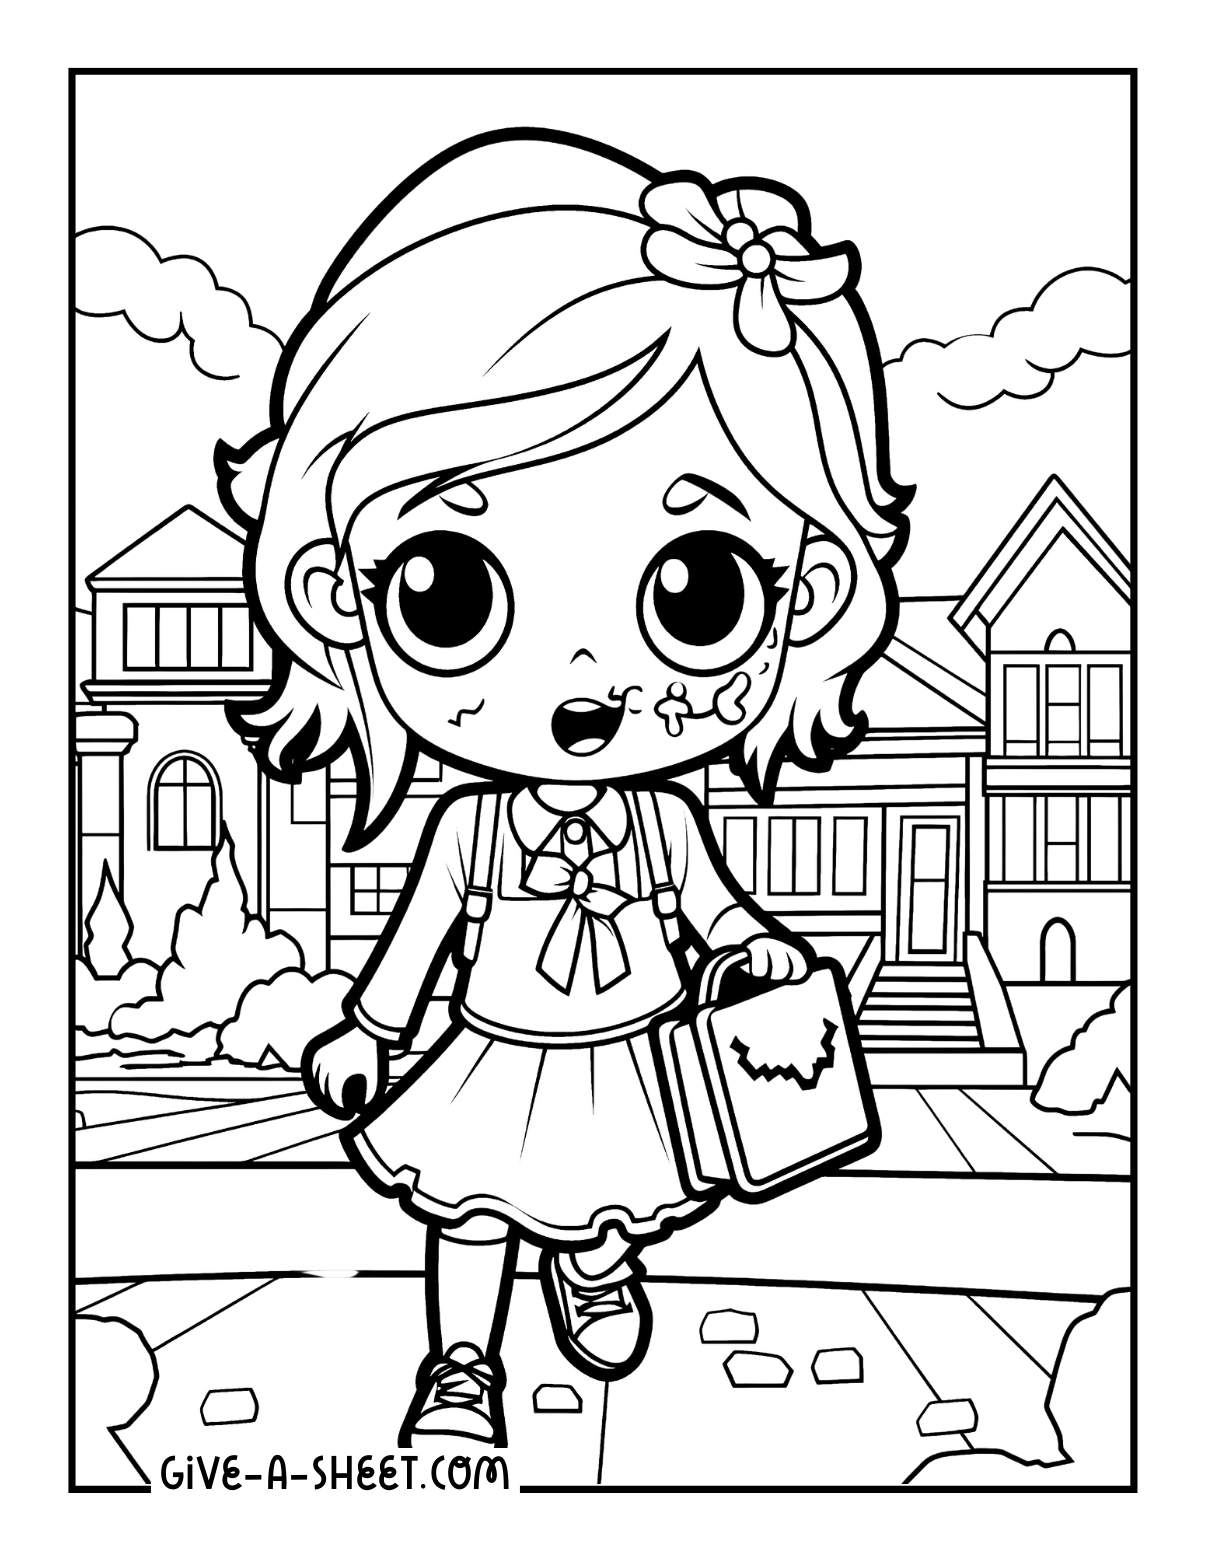 Zombie preschoolers at school coloring page for kids.